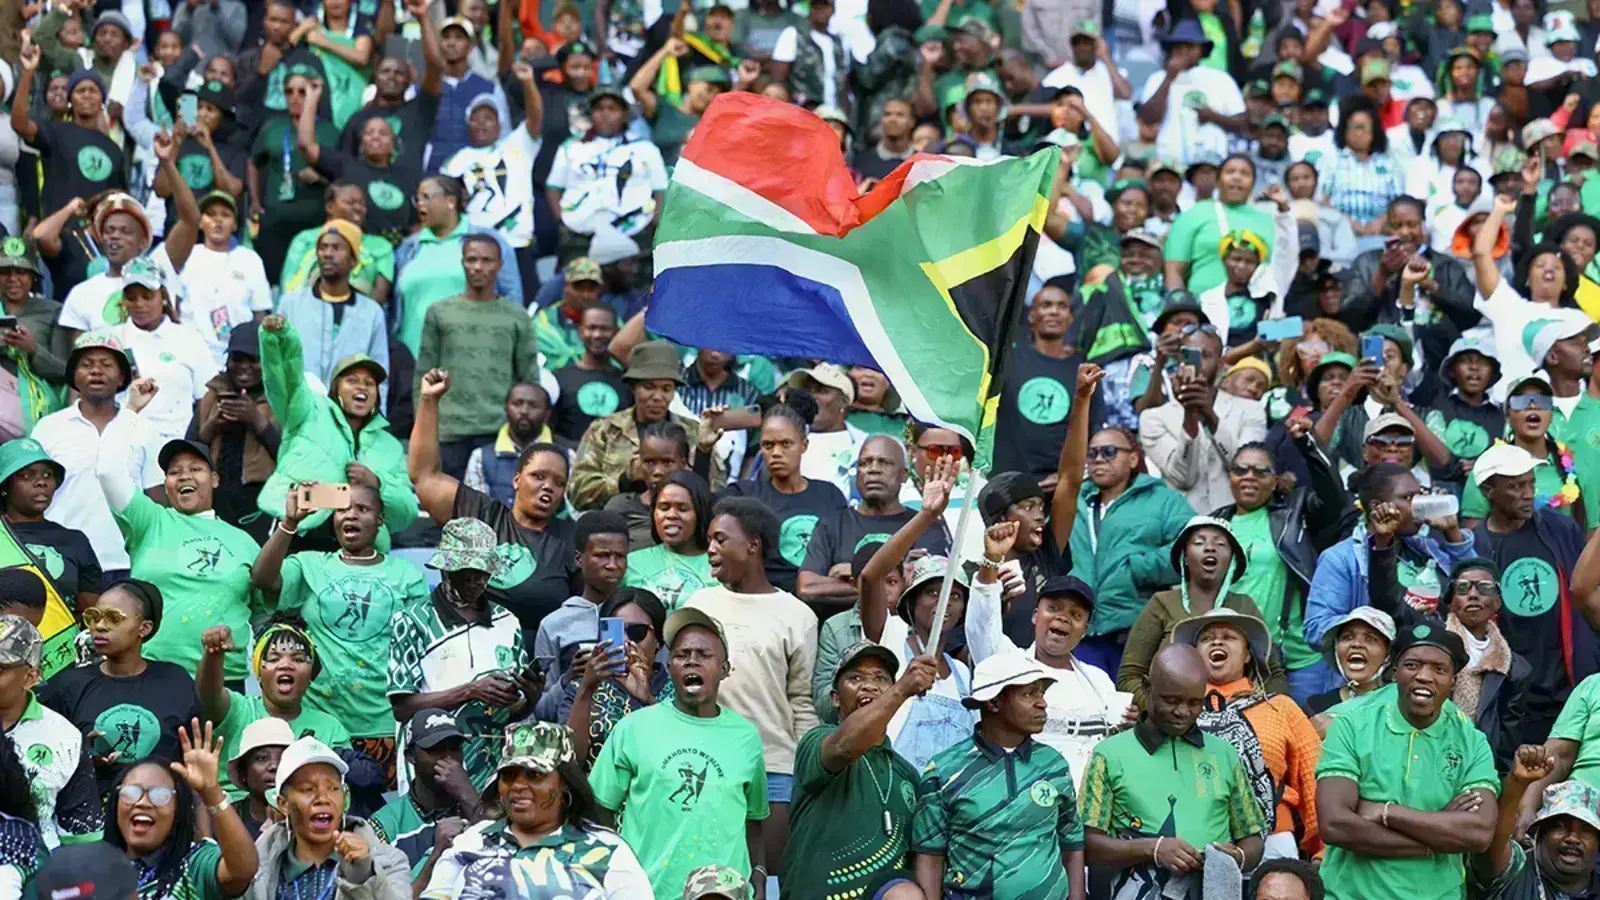 Supporters of former South African President Jacob Zuma’s new political party wave the South African flag ahead of a general election in 2024.